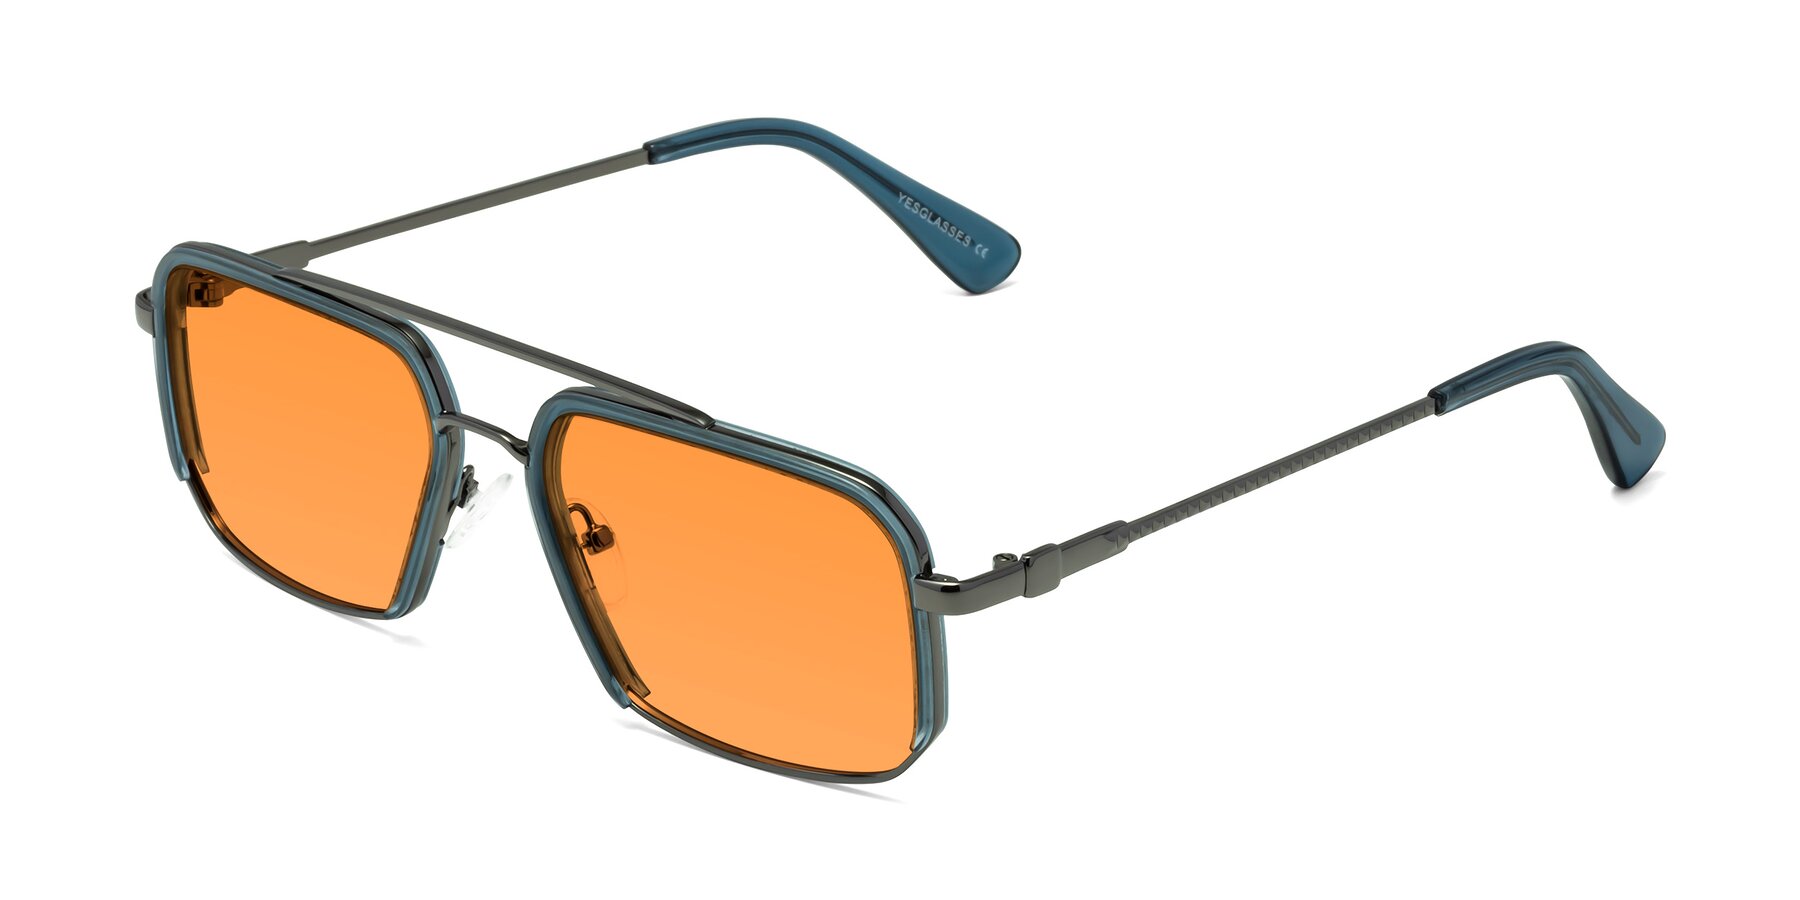 Angle of Dechter in Teal-Gunmetal with Orange Tinted Lenses